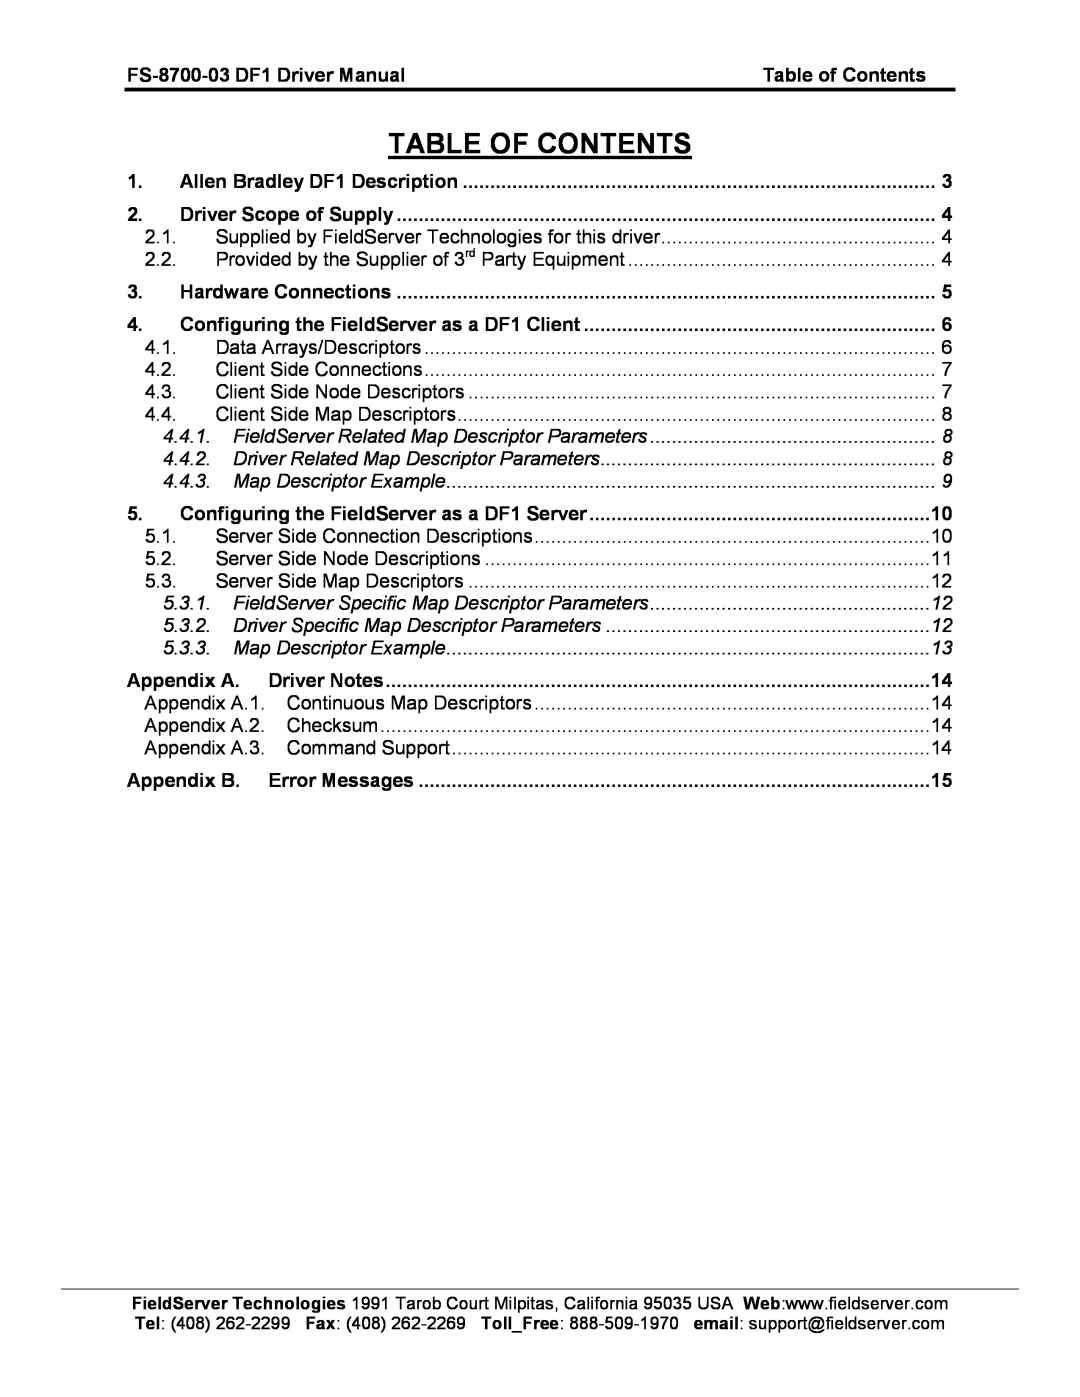 FieldServer FS-8700-03 DF1 instruction manual Table Of Contents 